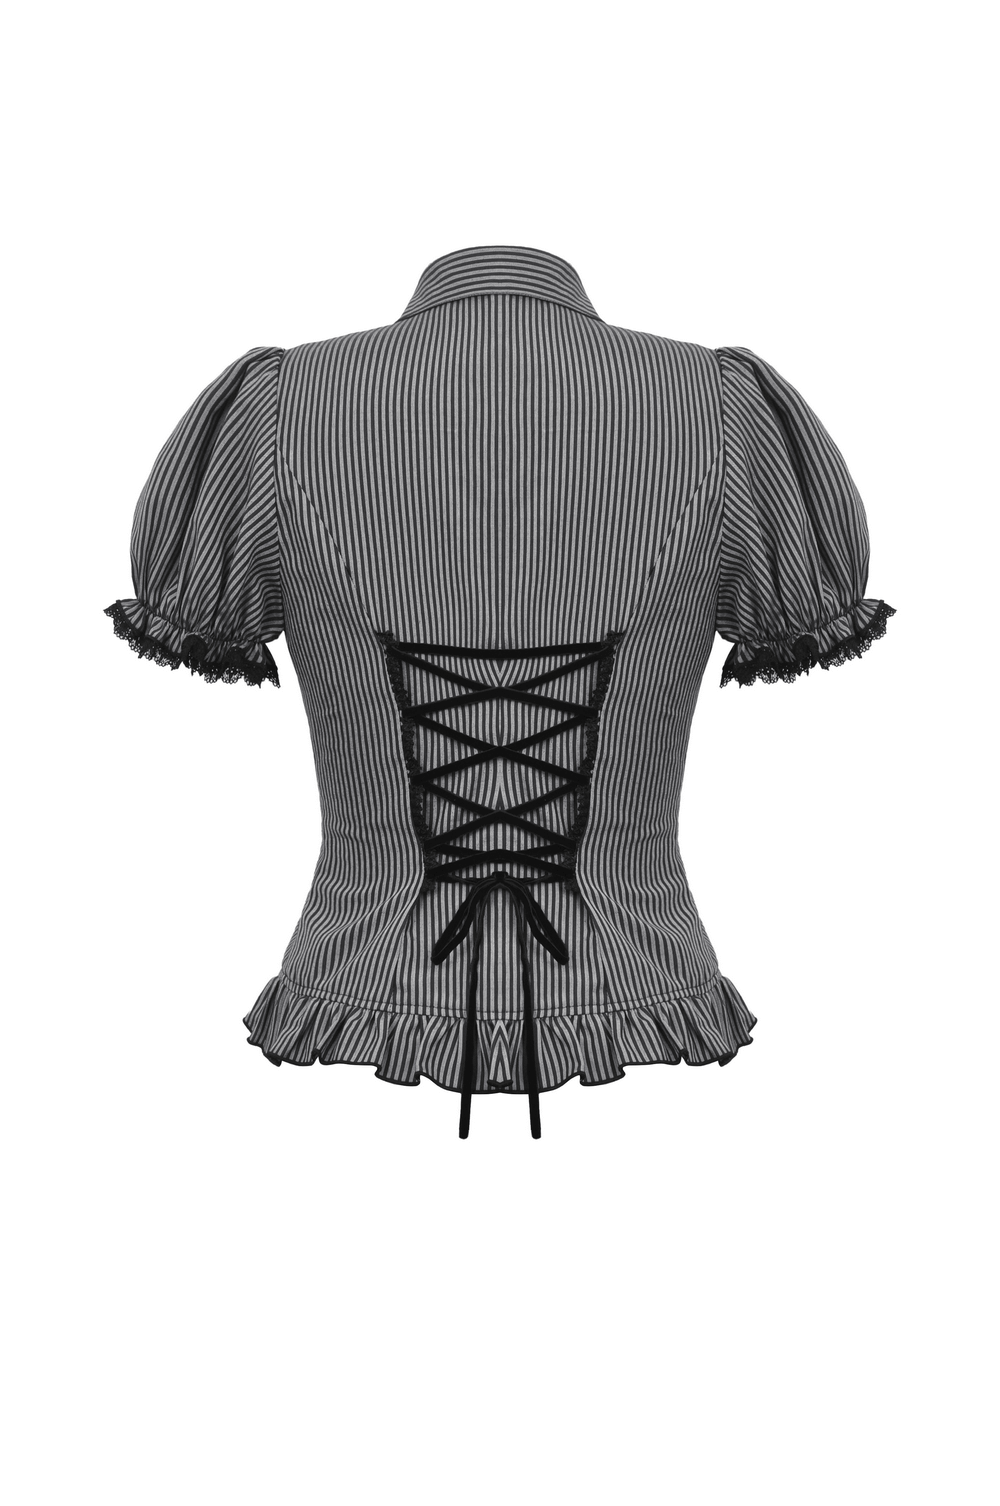 Striped Gothic Blouse with Bow and Lace Details